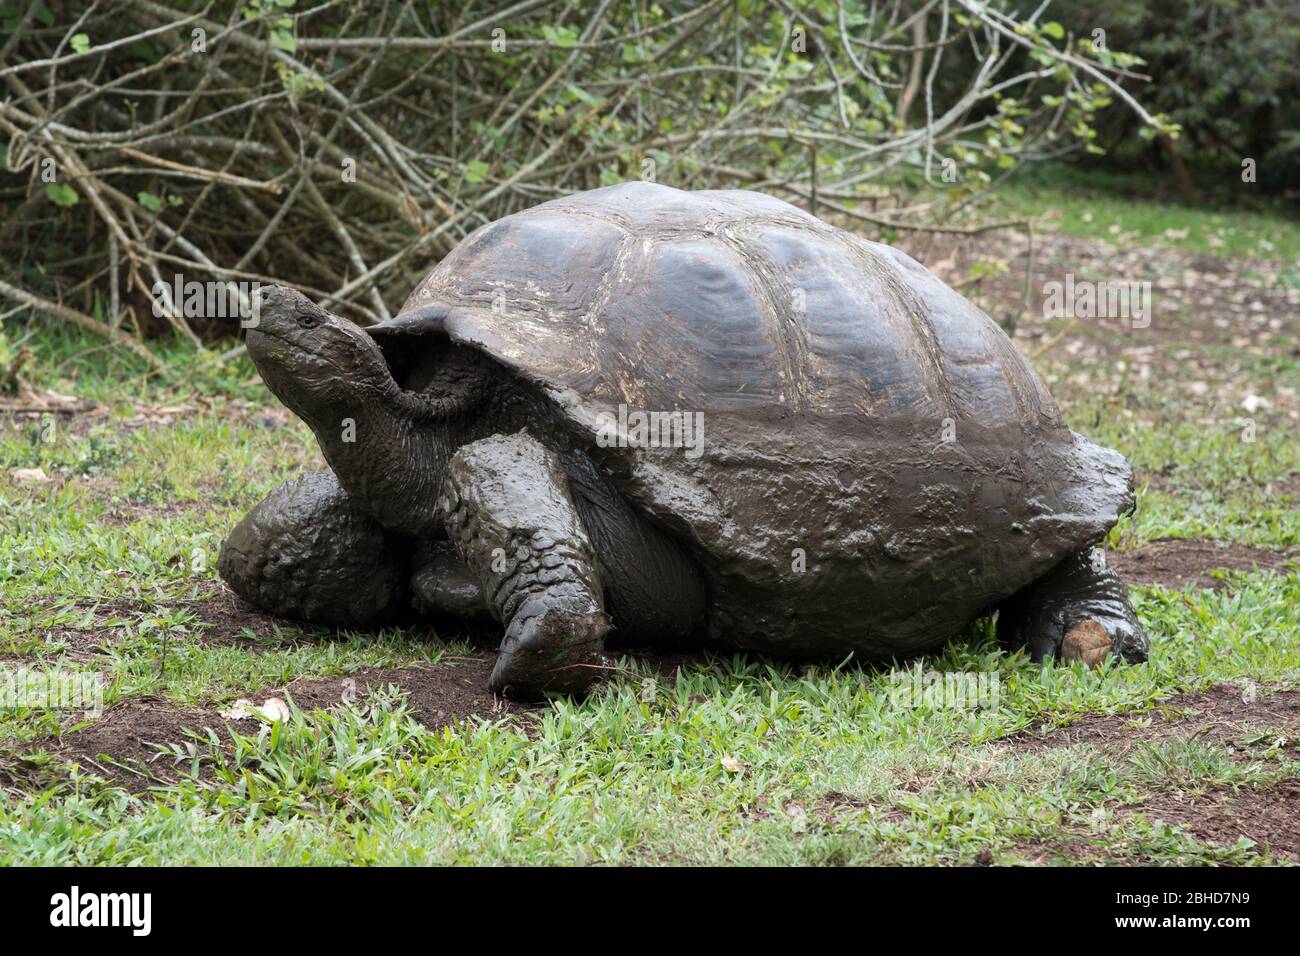 Galápagos tortoise in the El Chato Reserve on Santa Cruz at the Galapagos Islands. Stock Photo